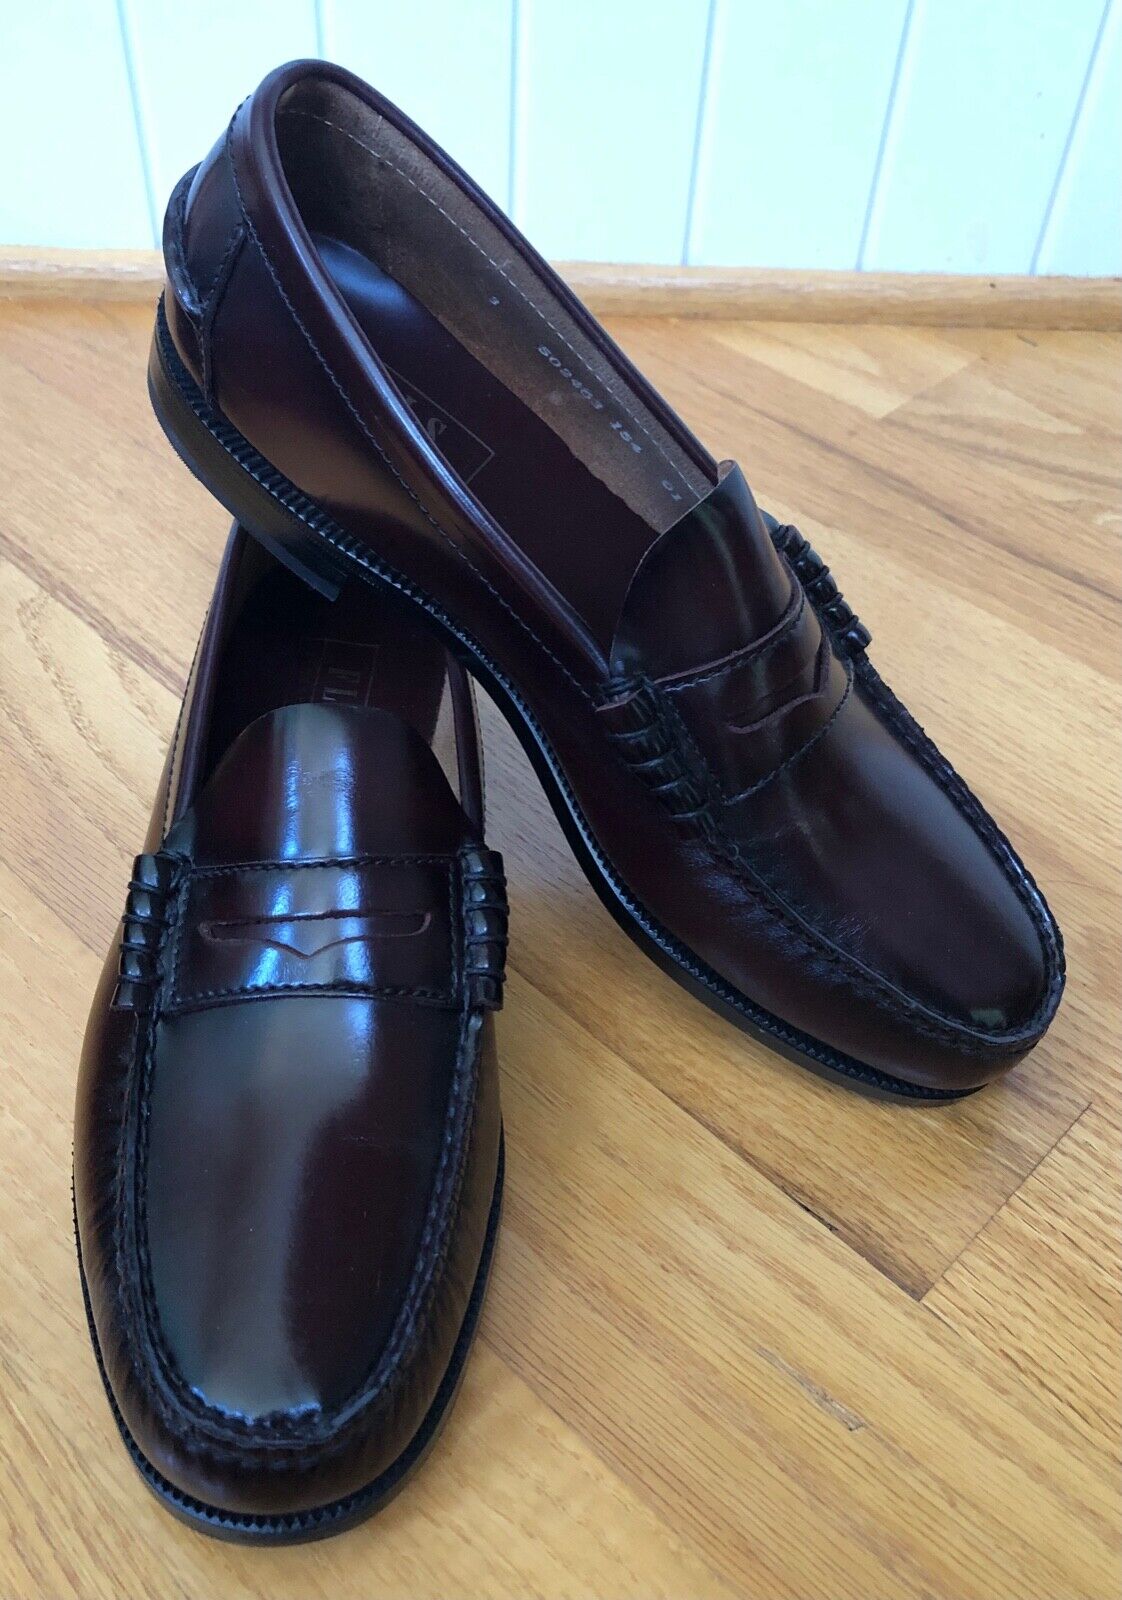 Florsheim Men Moc Toe Penny Loafers Cordovan Fixed price for sale US Max 80% OFF 9 Size Berkley D